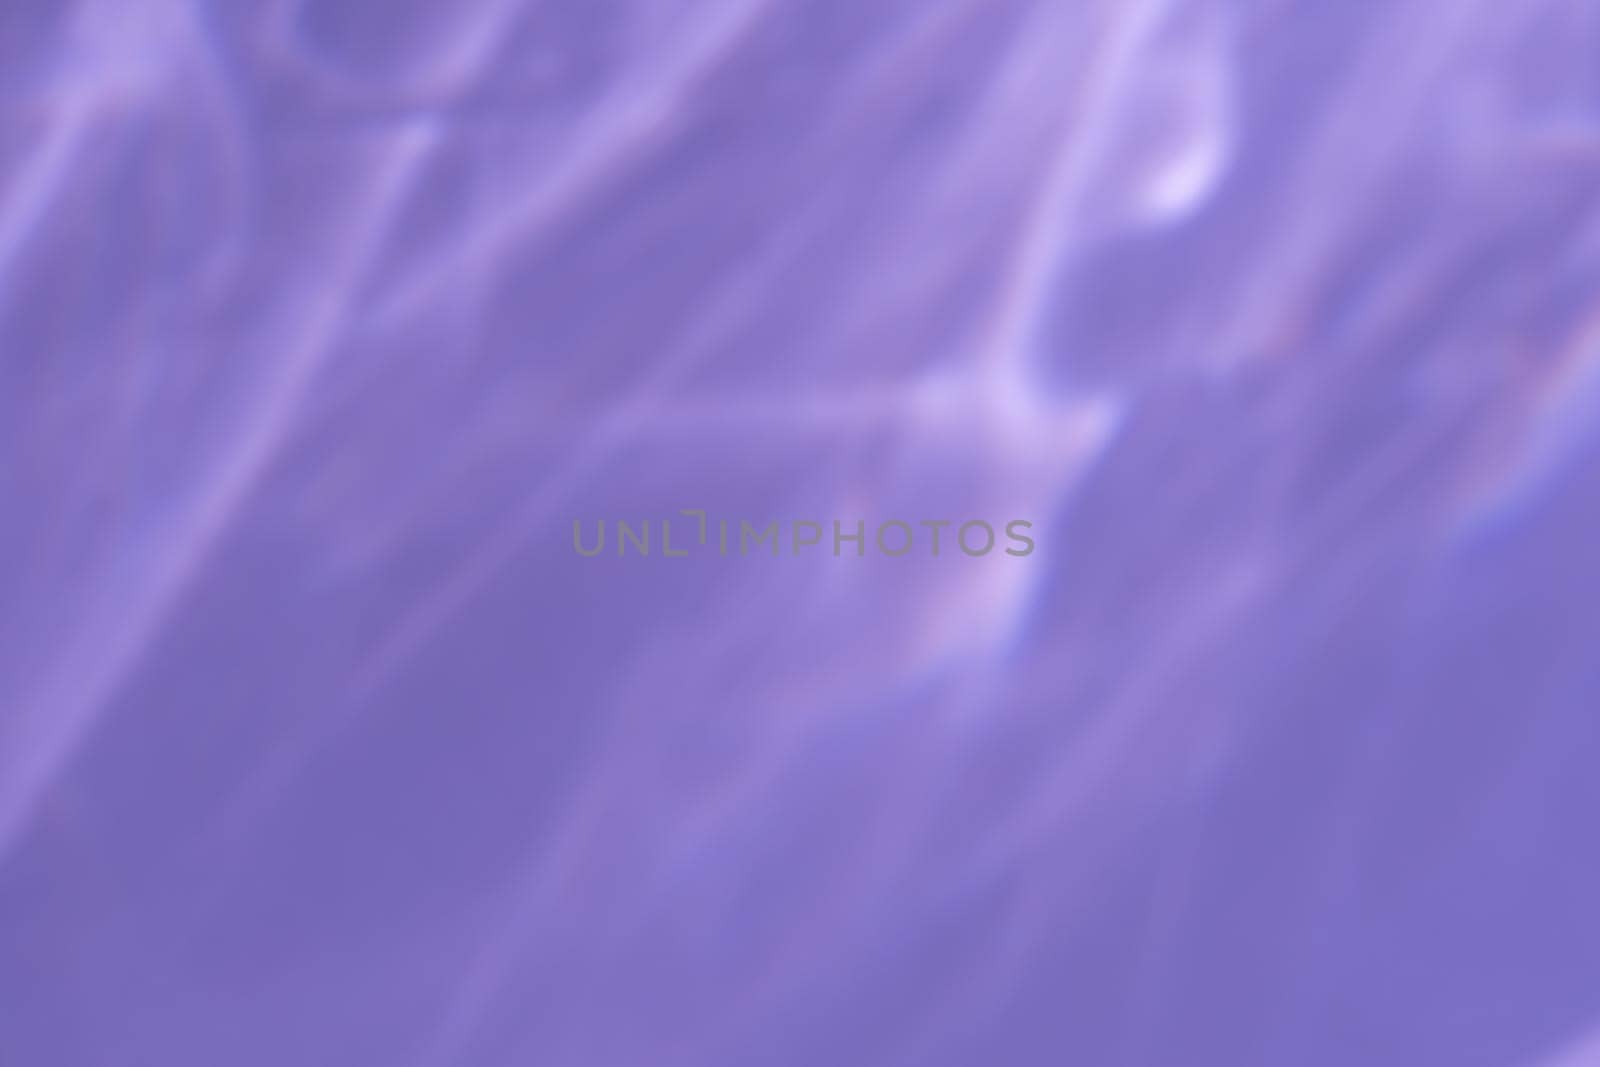 Caustic effect light refraction on lilac wall overlay photo mockup, blurred sun rays refracting through glass prism with shadow. Abstract natural light refraction silhouette on water surface mock up.